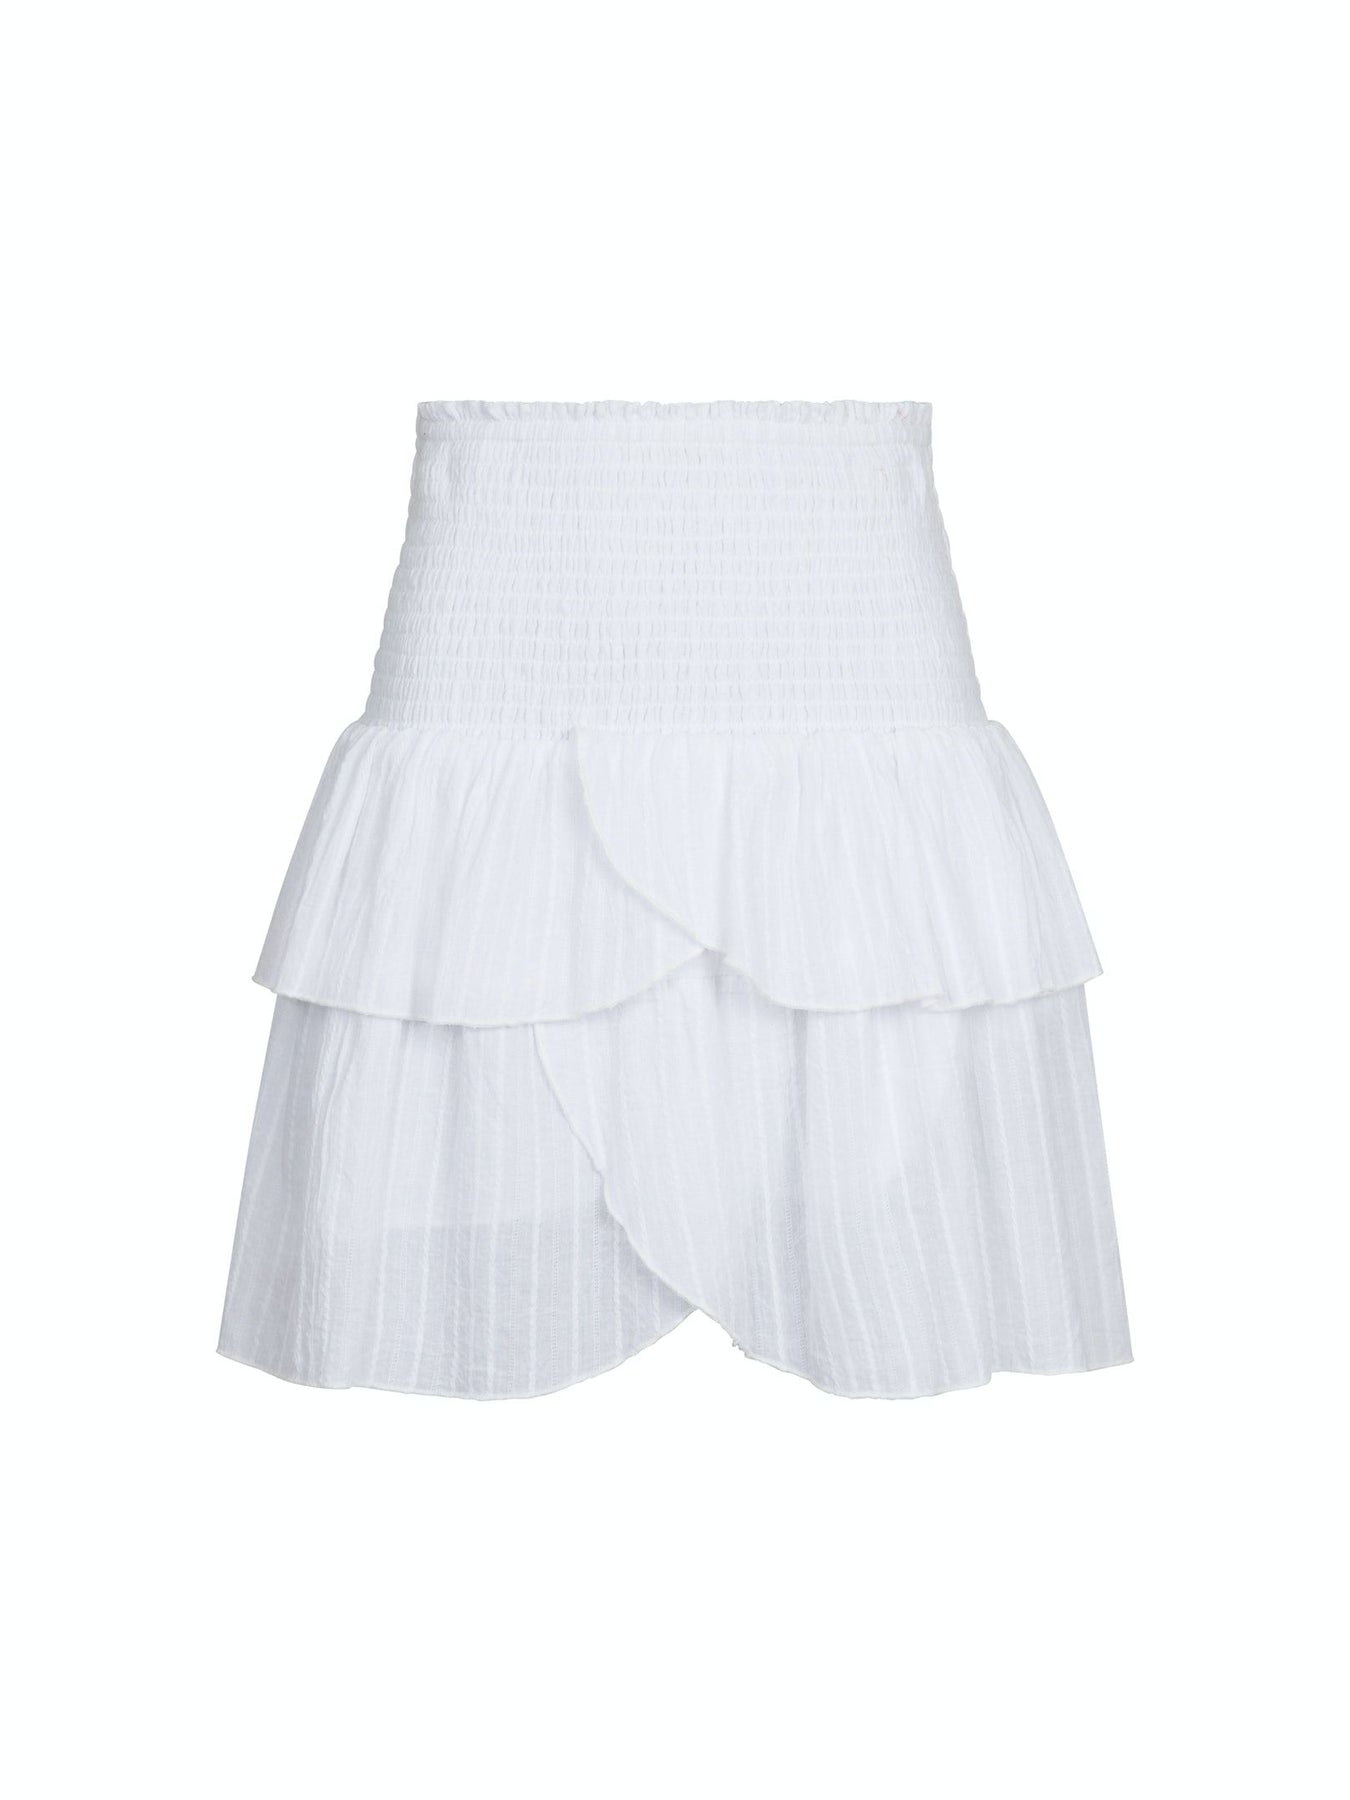 Carin Structure Skirt - Off White